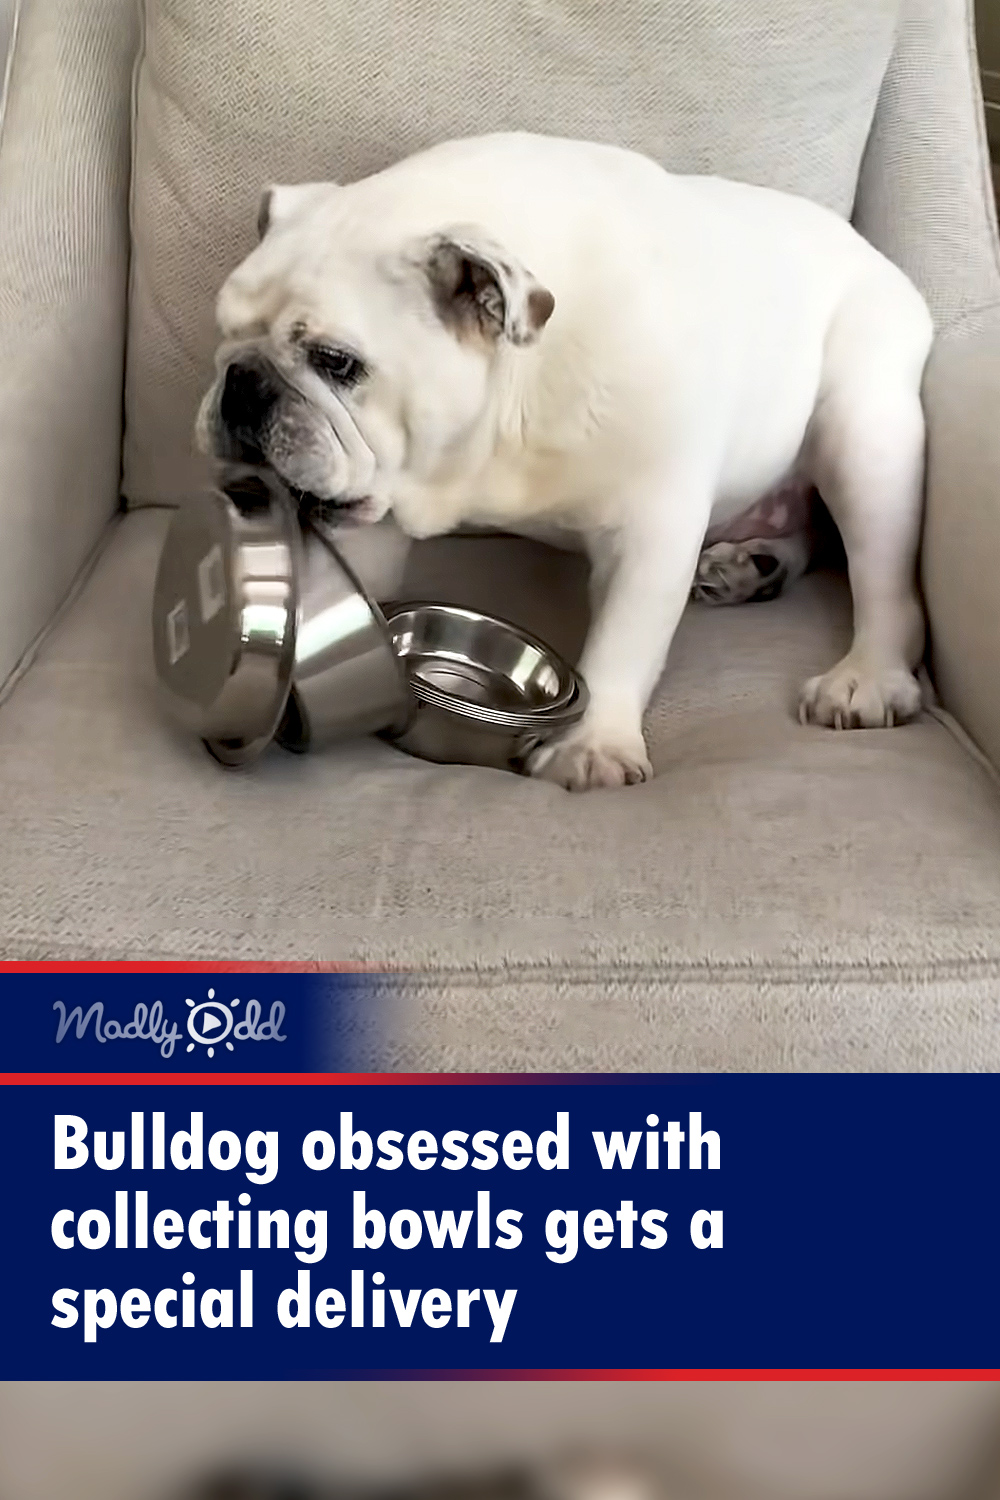 Bulldog obsessed with collecting bowls gets a special delivery